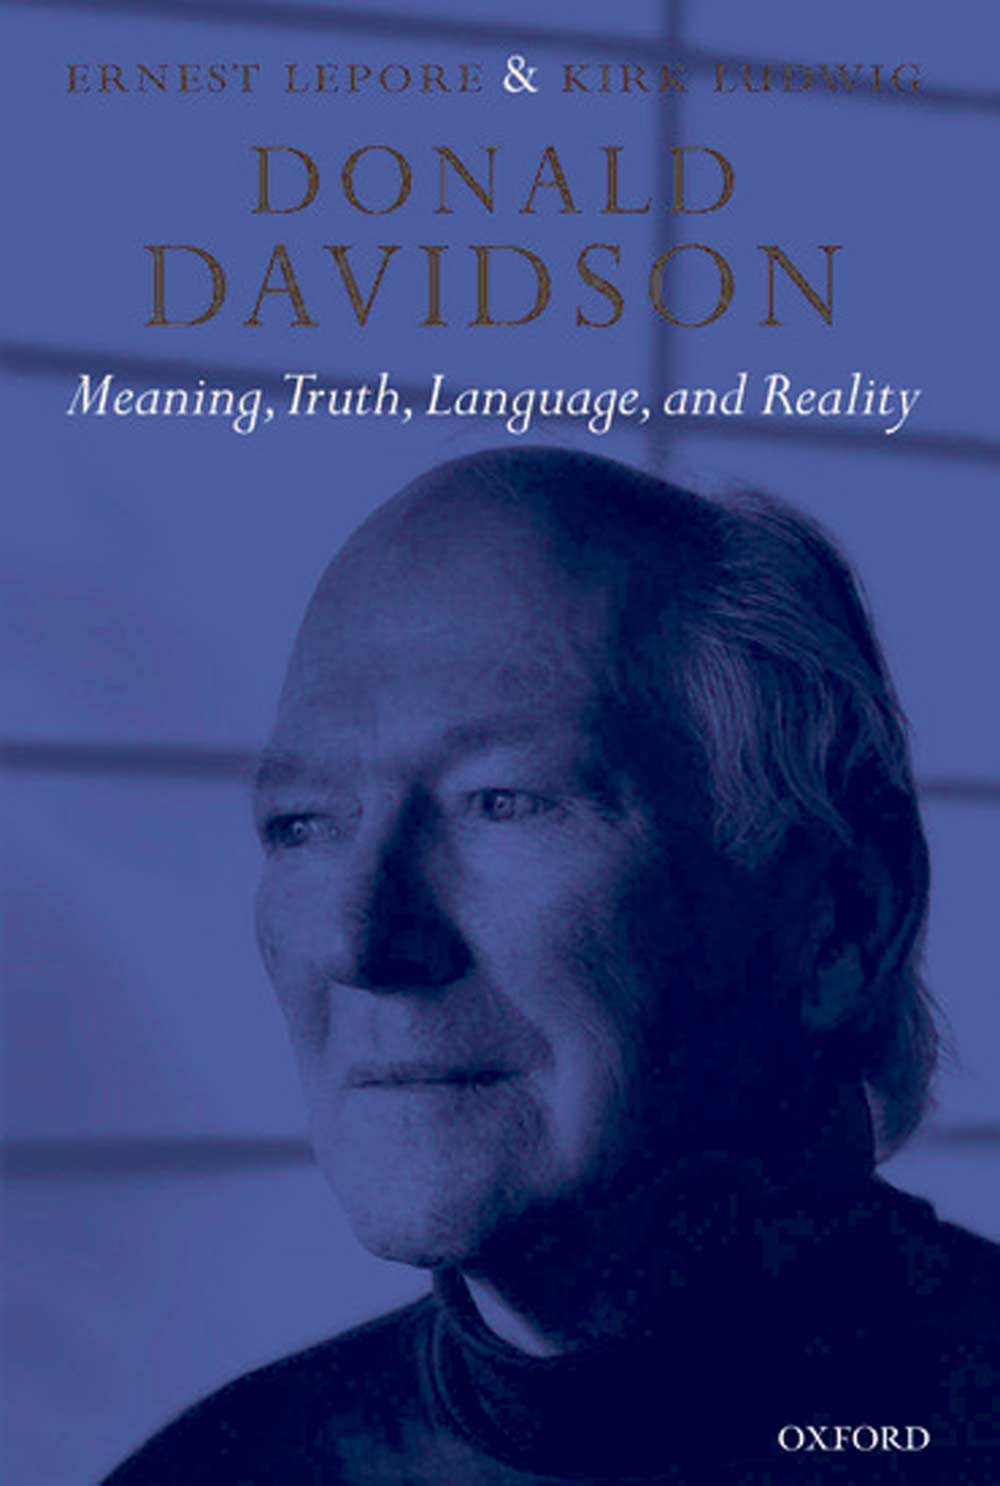 Donald Davidson: Meaning, Truth, Language, and Reality